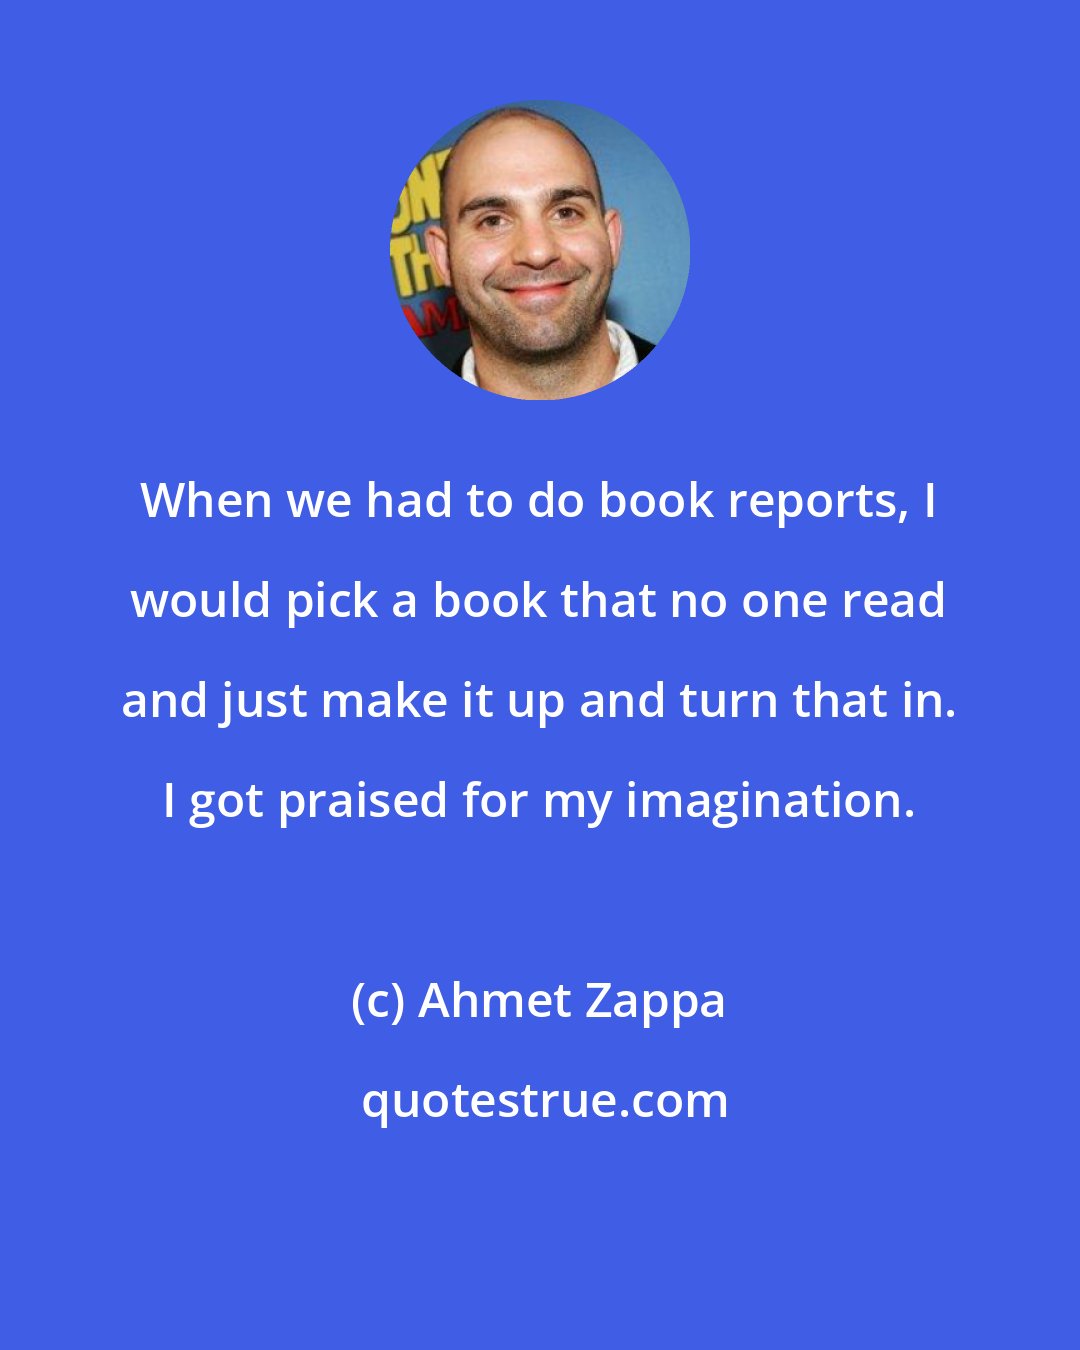 Ahmet Zappa: When we had to do book reports, I would pick a book that no one read and just make it up and turn that in. I got praised for my imagination.